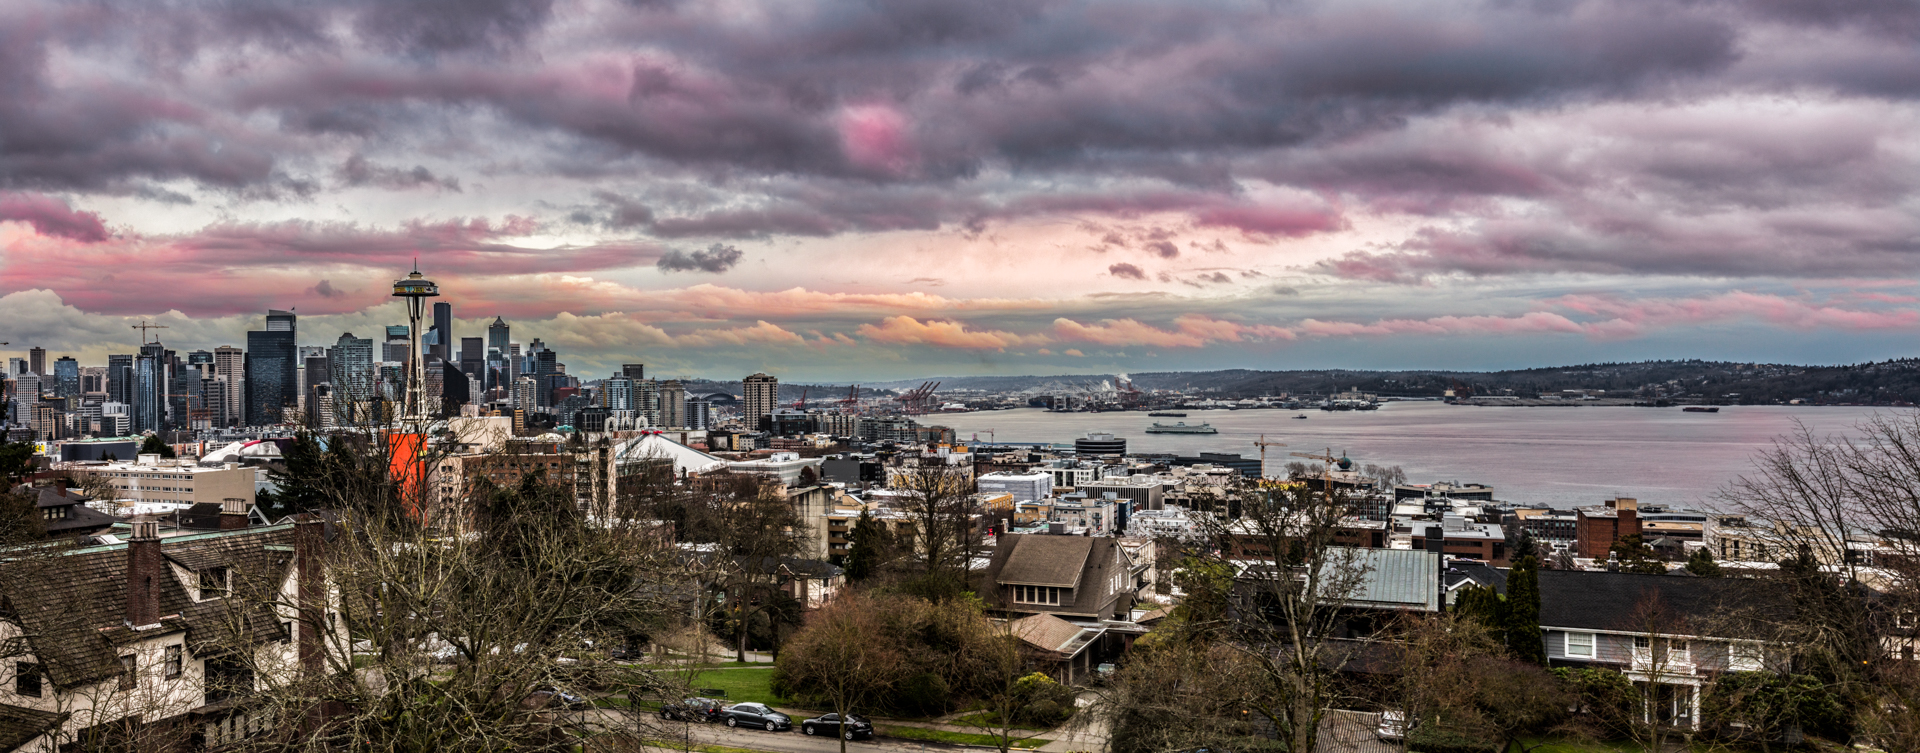 Sunset in Seattle Pano